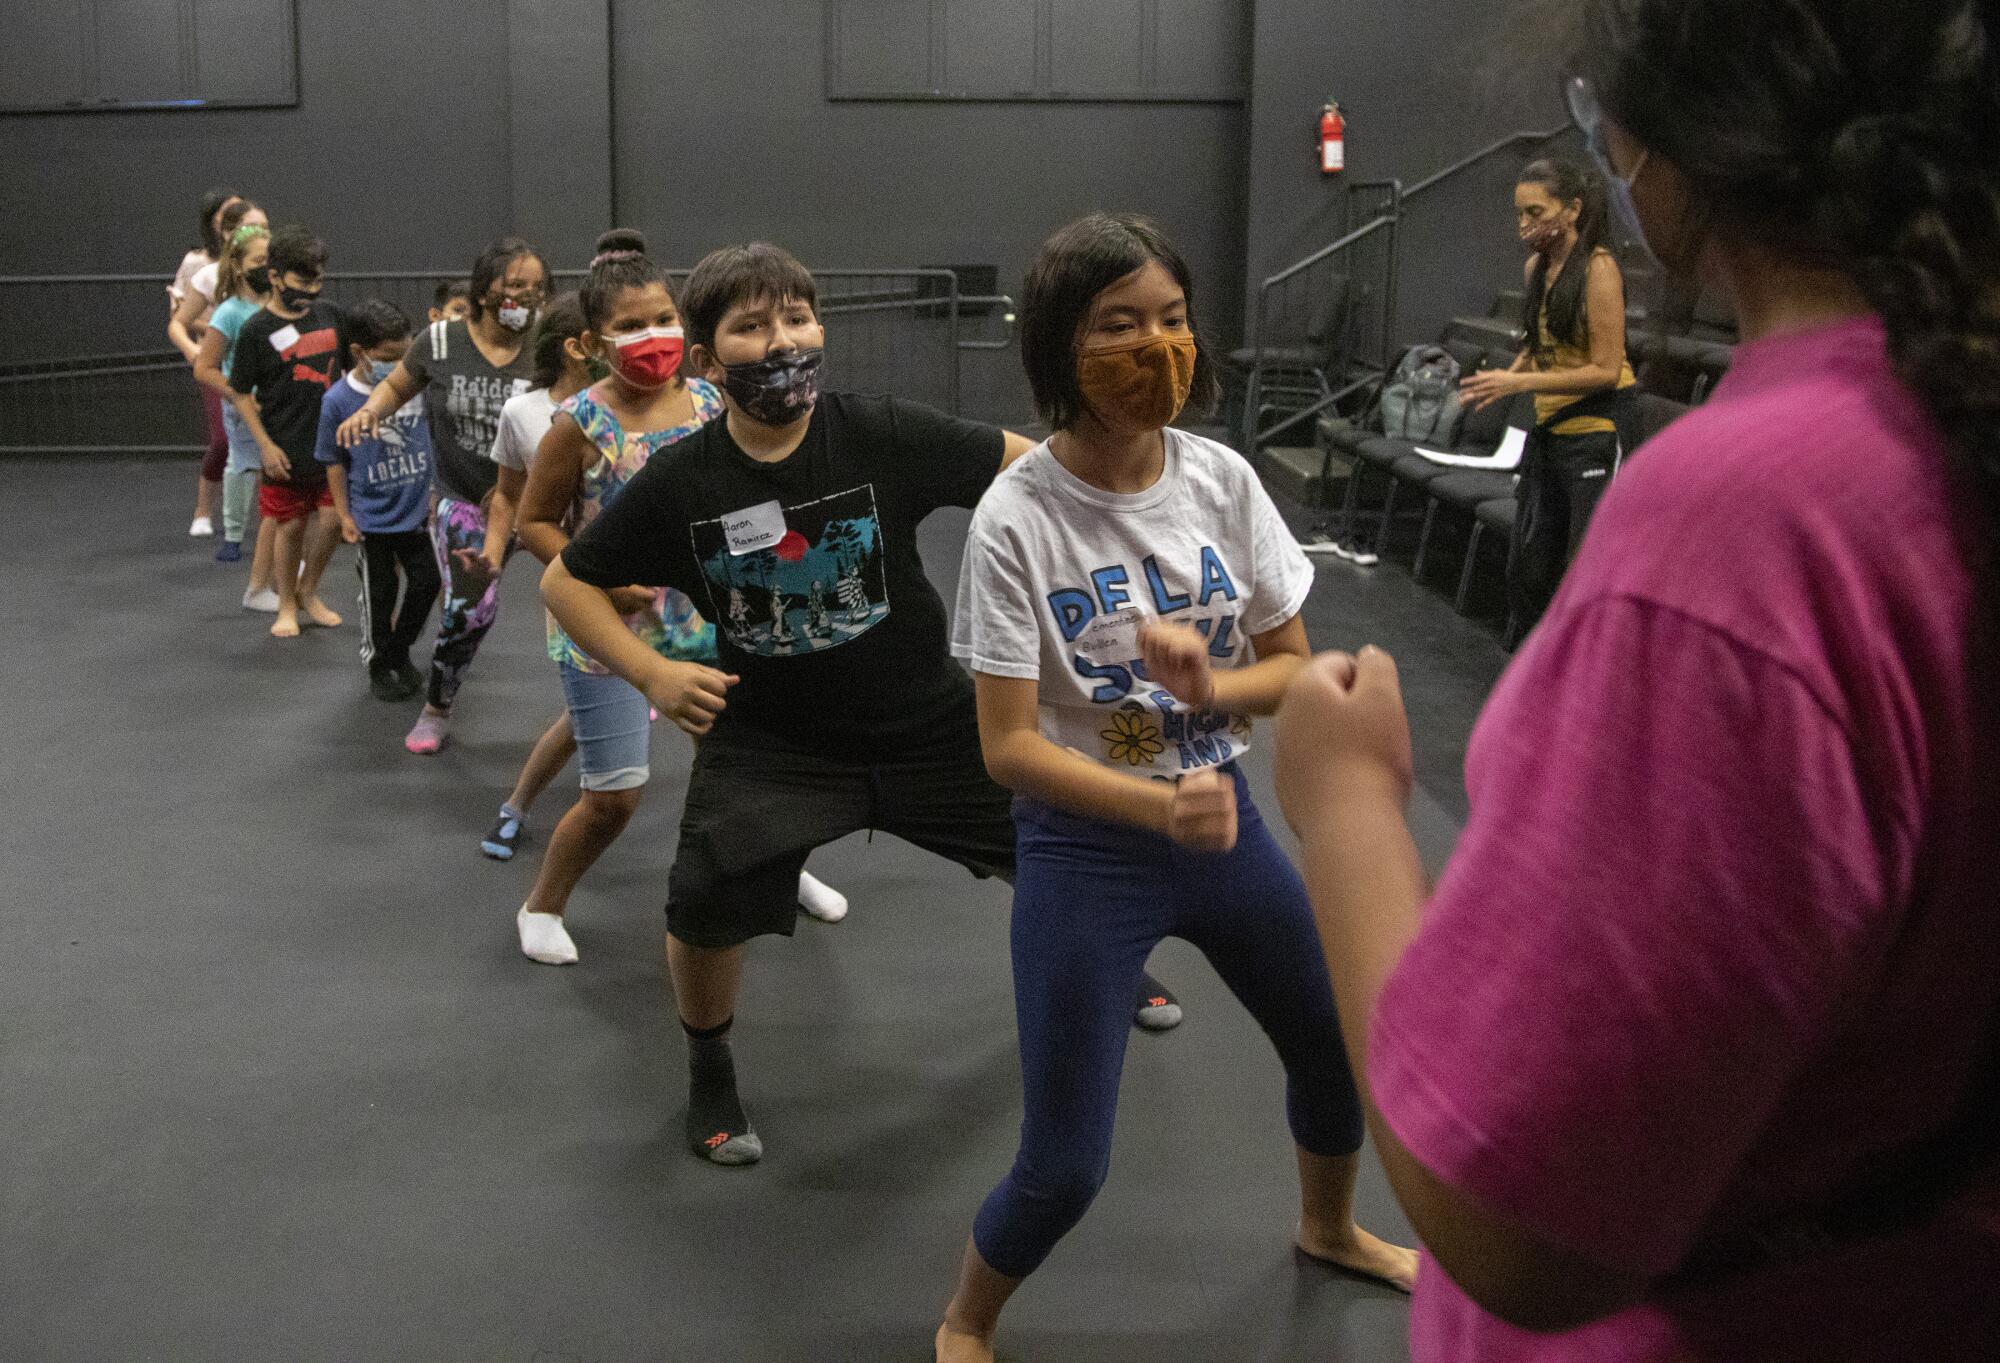 Students rehearse choreography during weekend classes at Casa 0101 in Boyle Heights